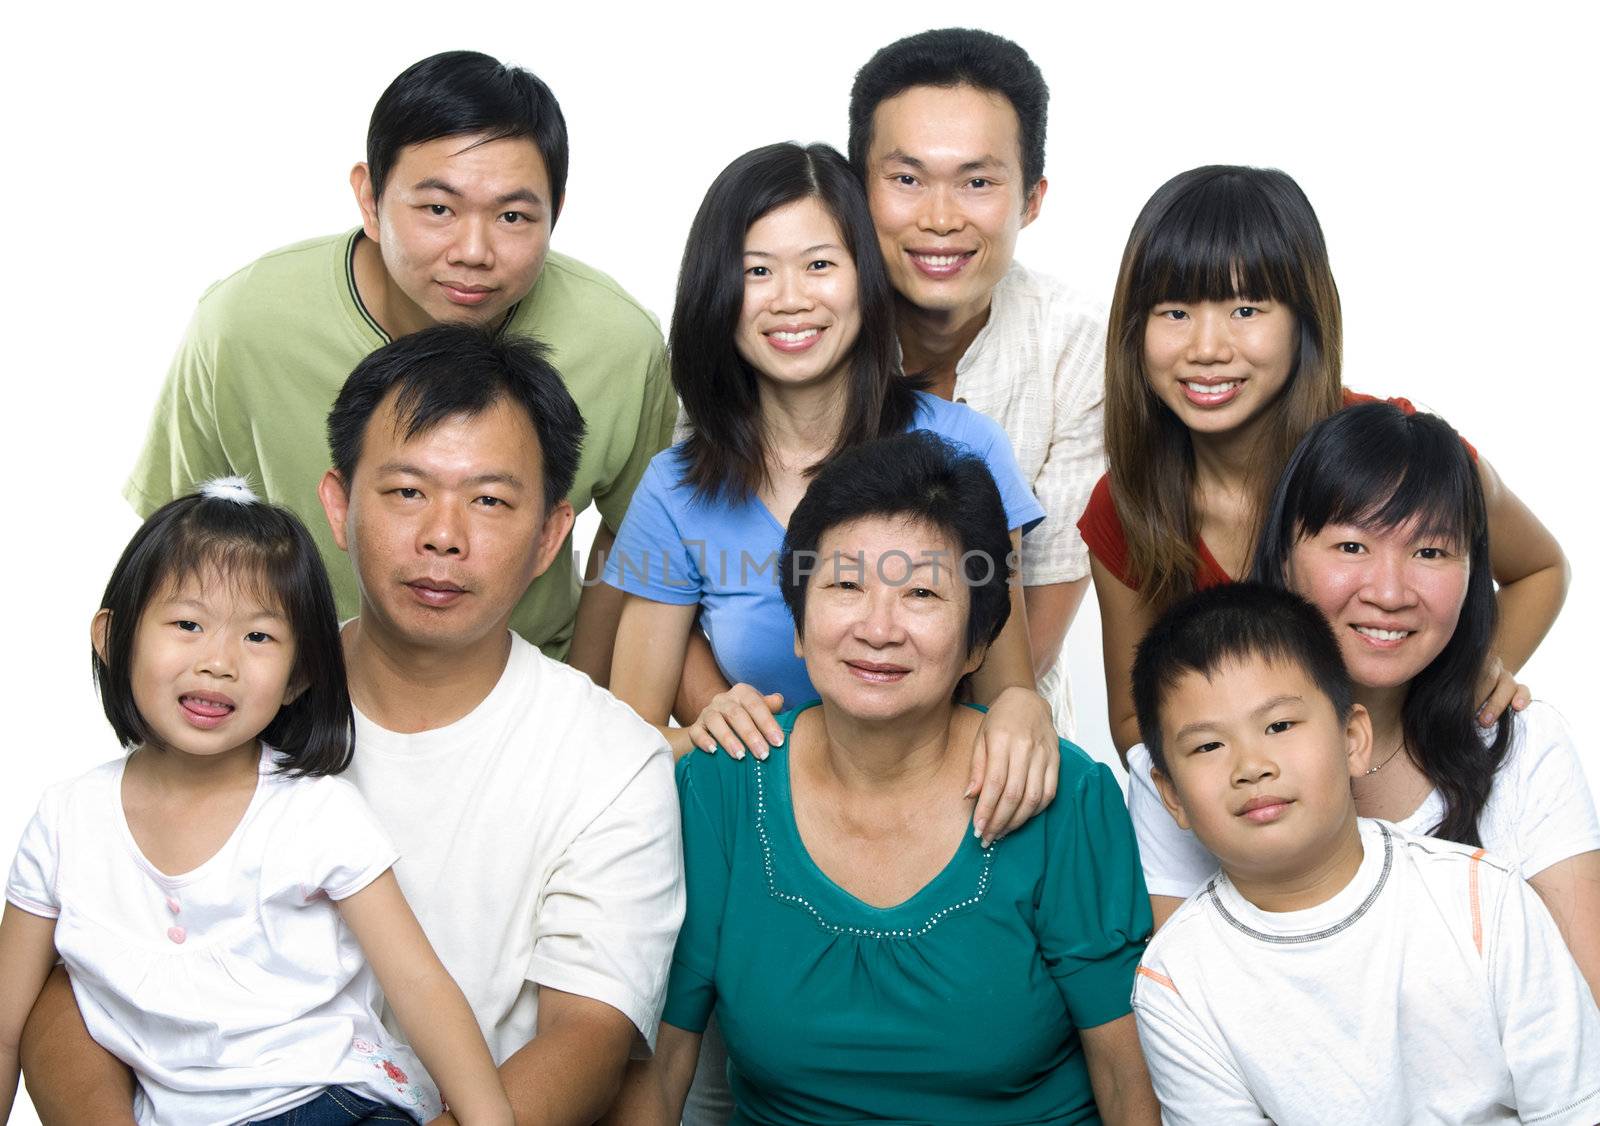 Asian family portrait on white background, 3 generations.